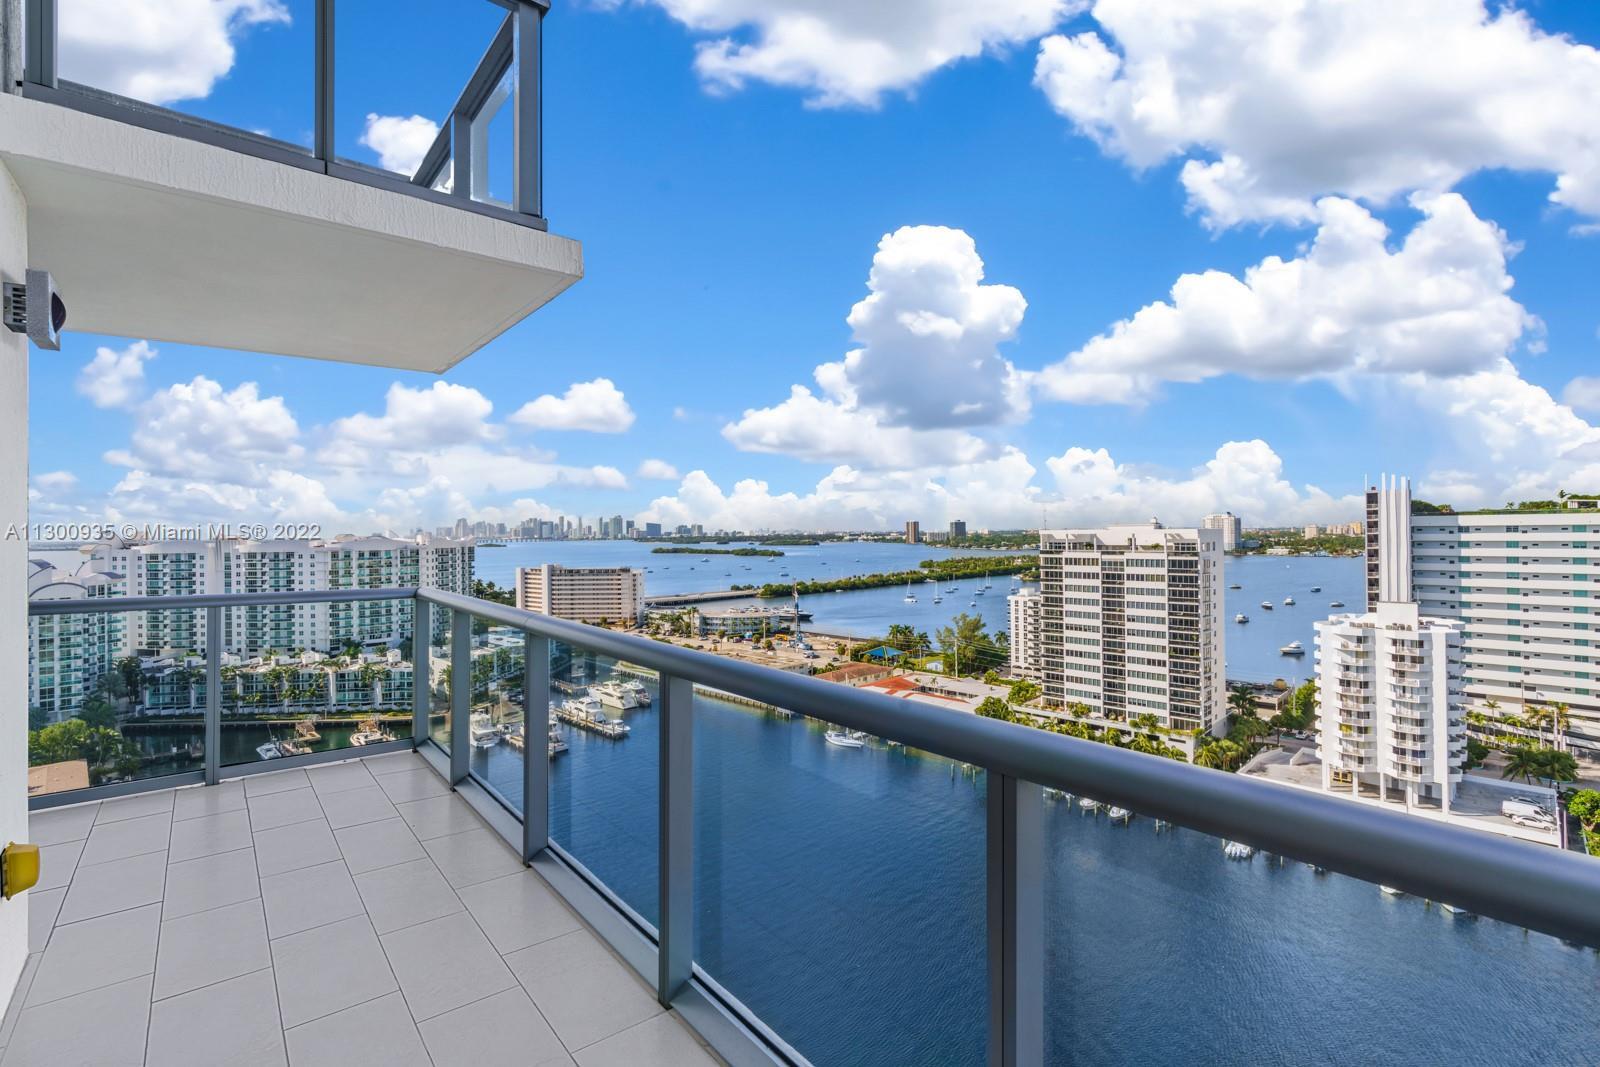 BAY VIEWS!! Two story, two bedroom 2.5 bathroom unit with west exposure overlooking Biscayne Bay, do